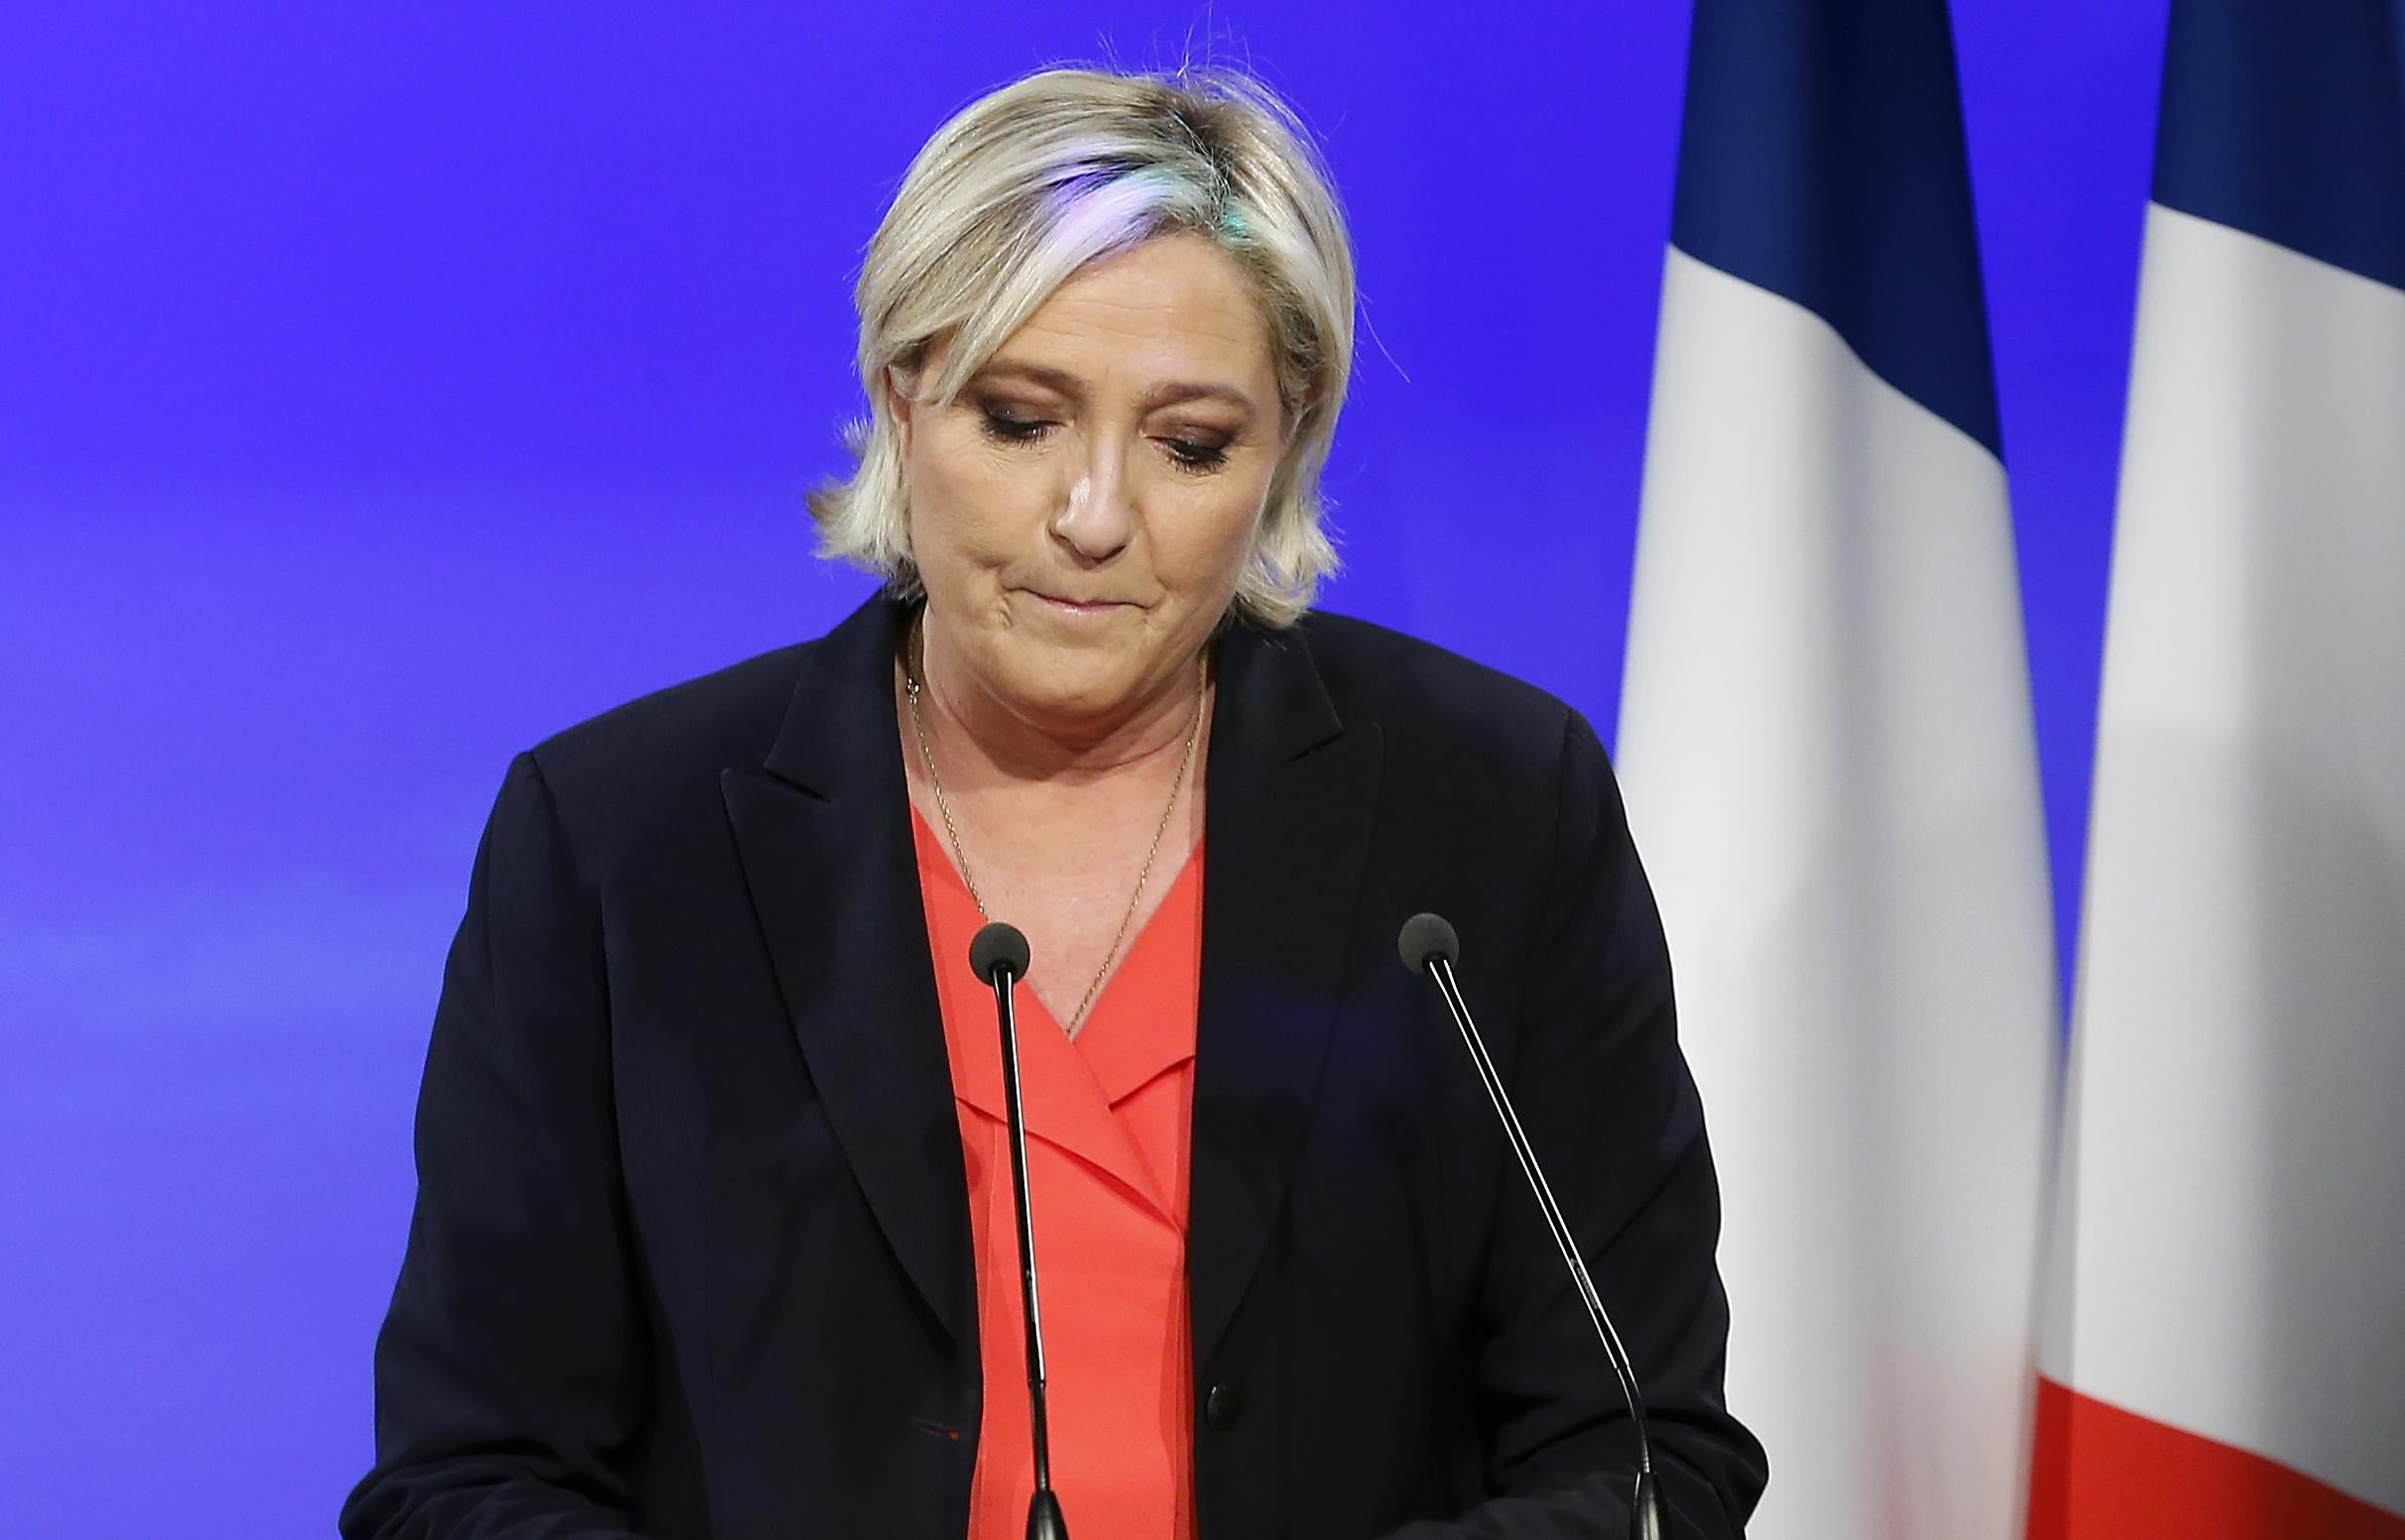 Ms Le Pen returned to the role of leader of Front National last week, after stepping down in the lead up to the election